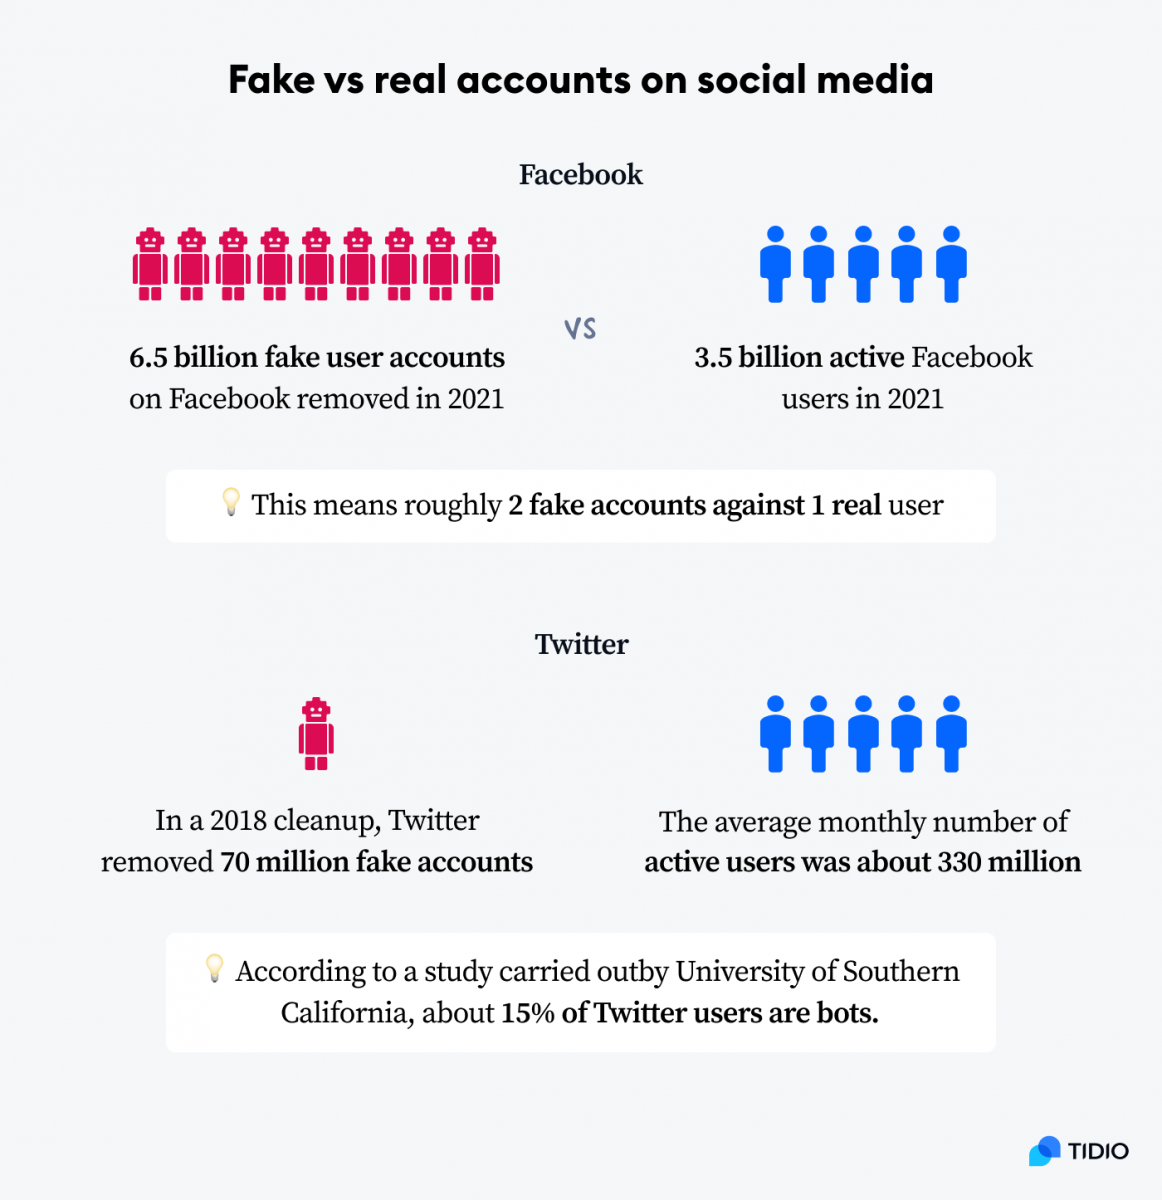 Fake vs real account on Facebook and Twitter